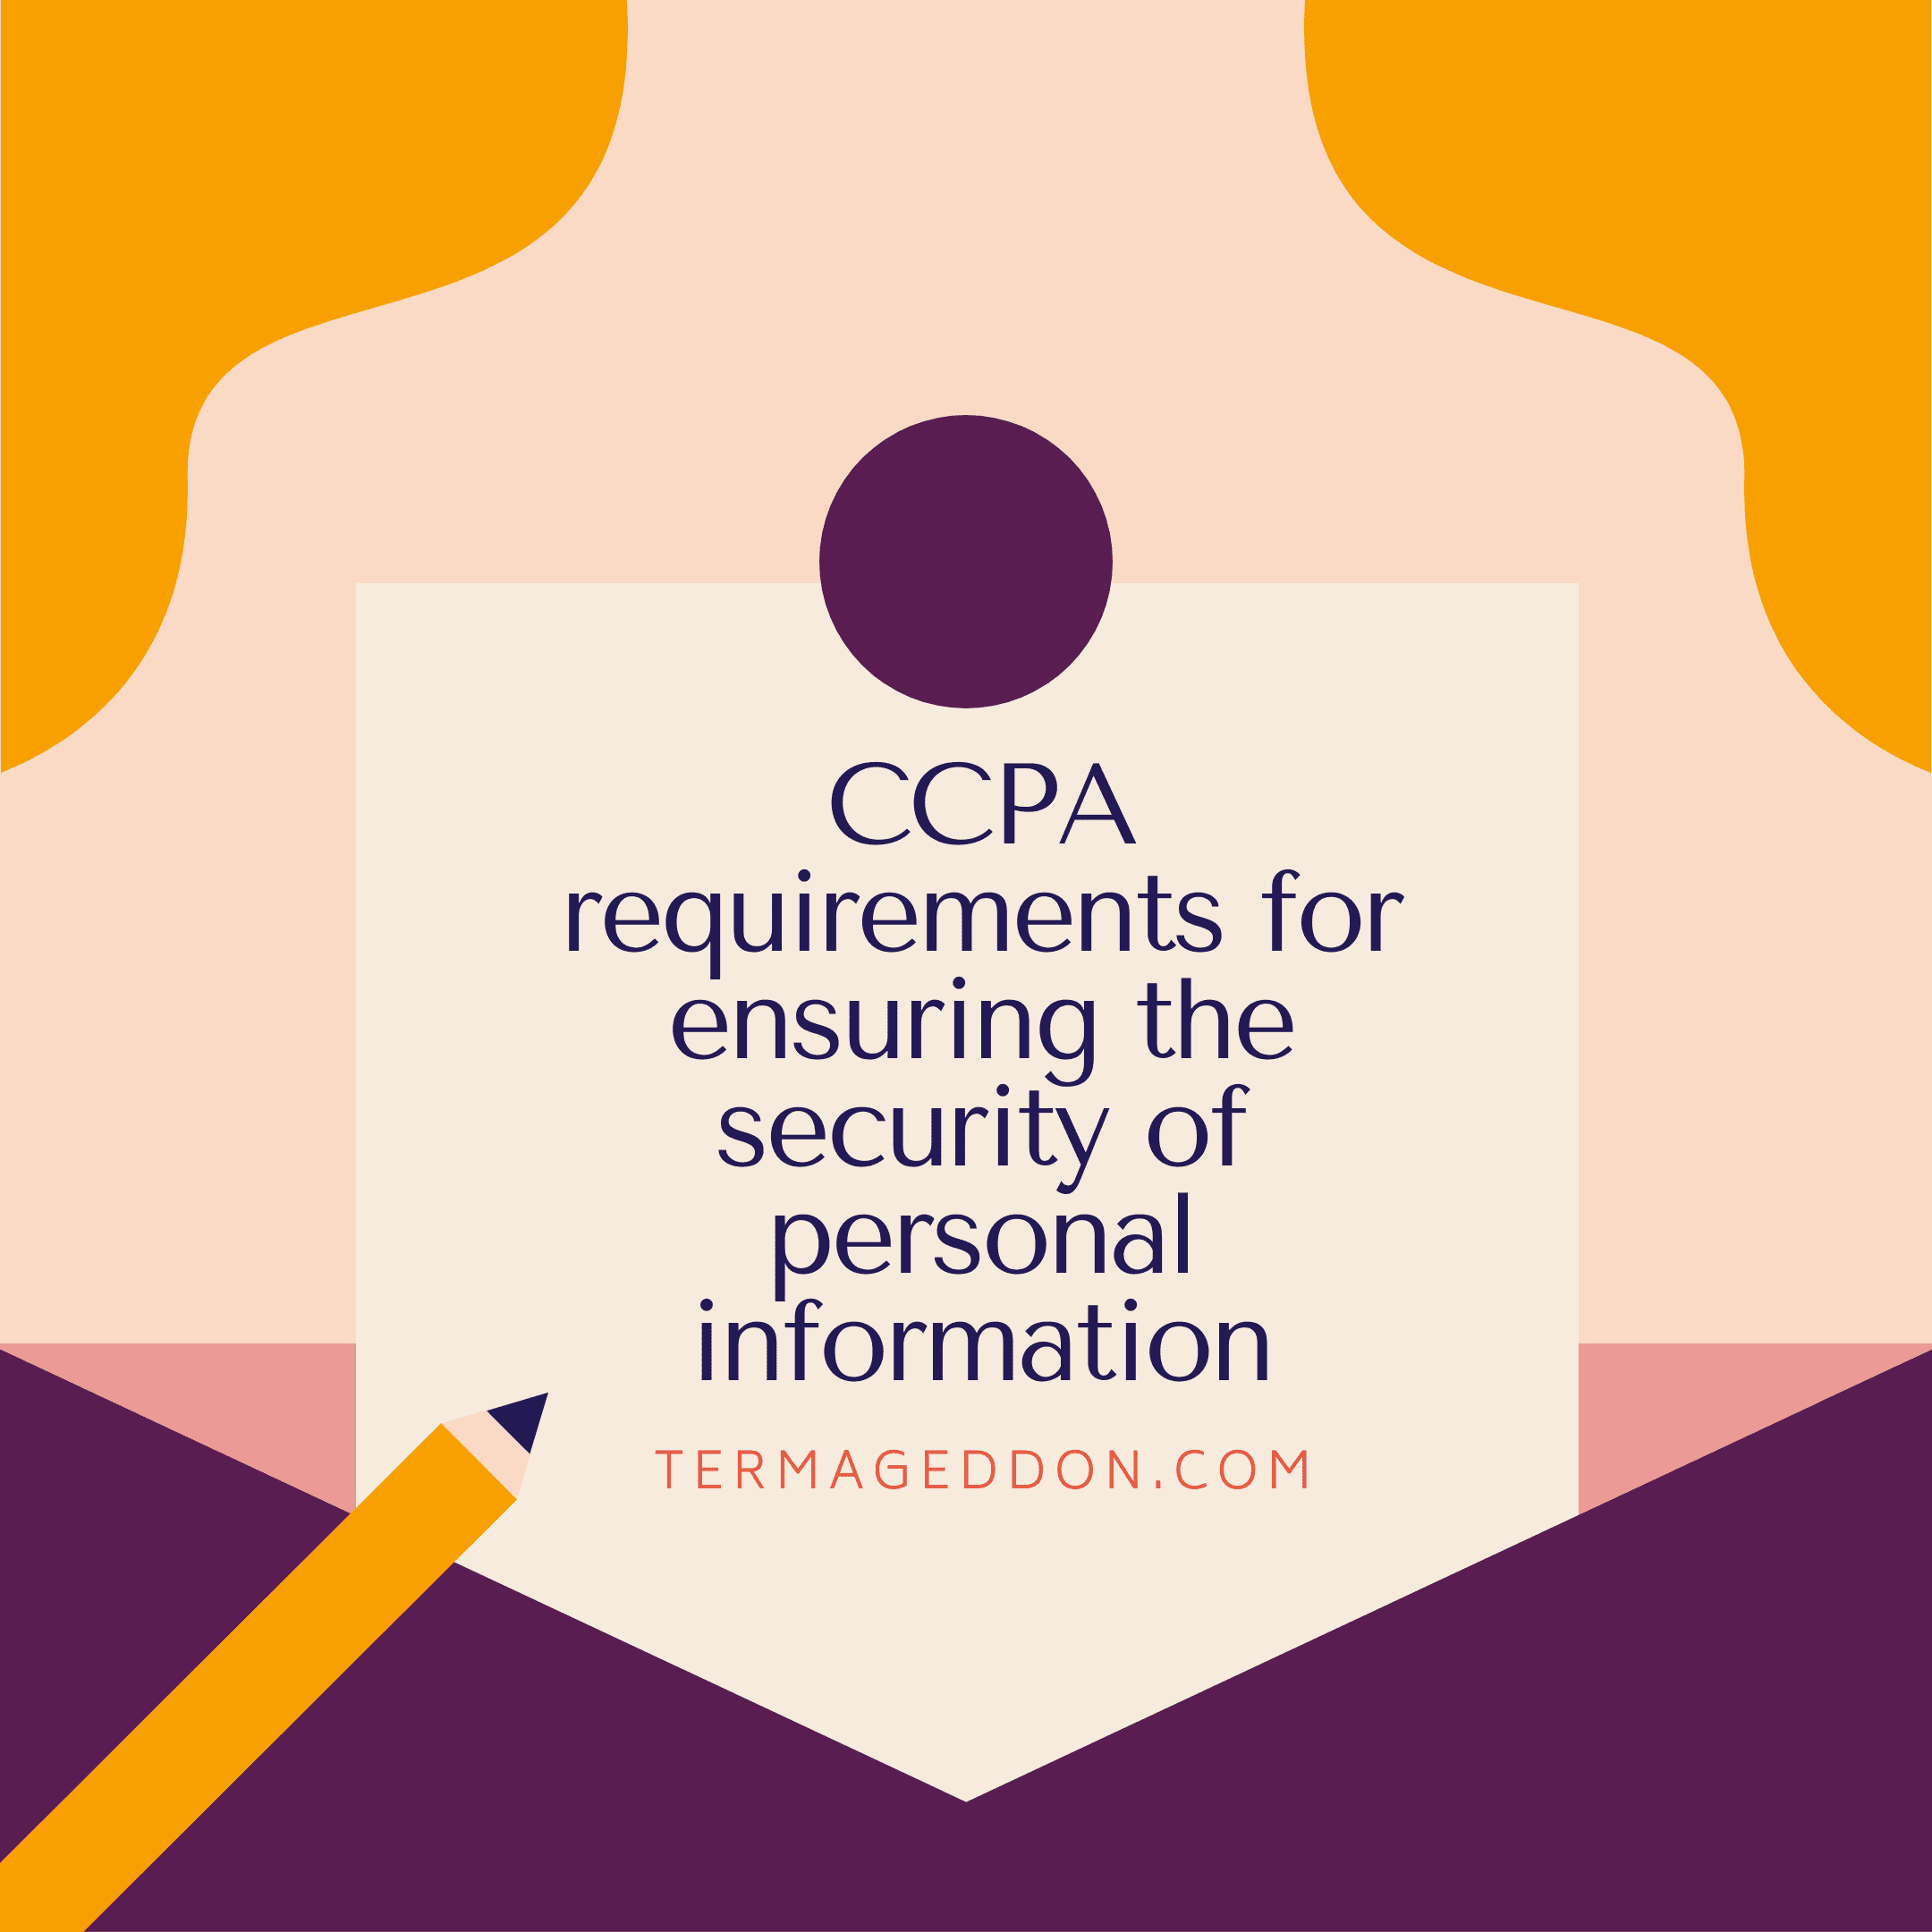 CCPA requirements for ensuring the security of personal information